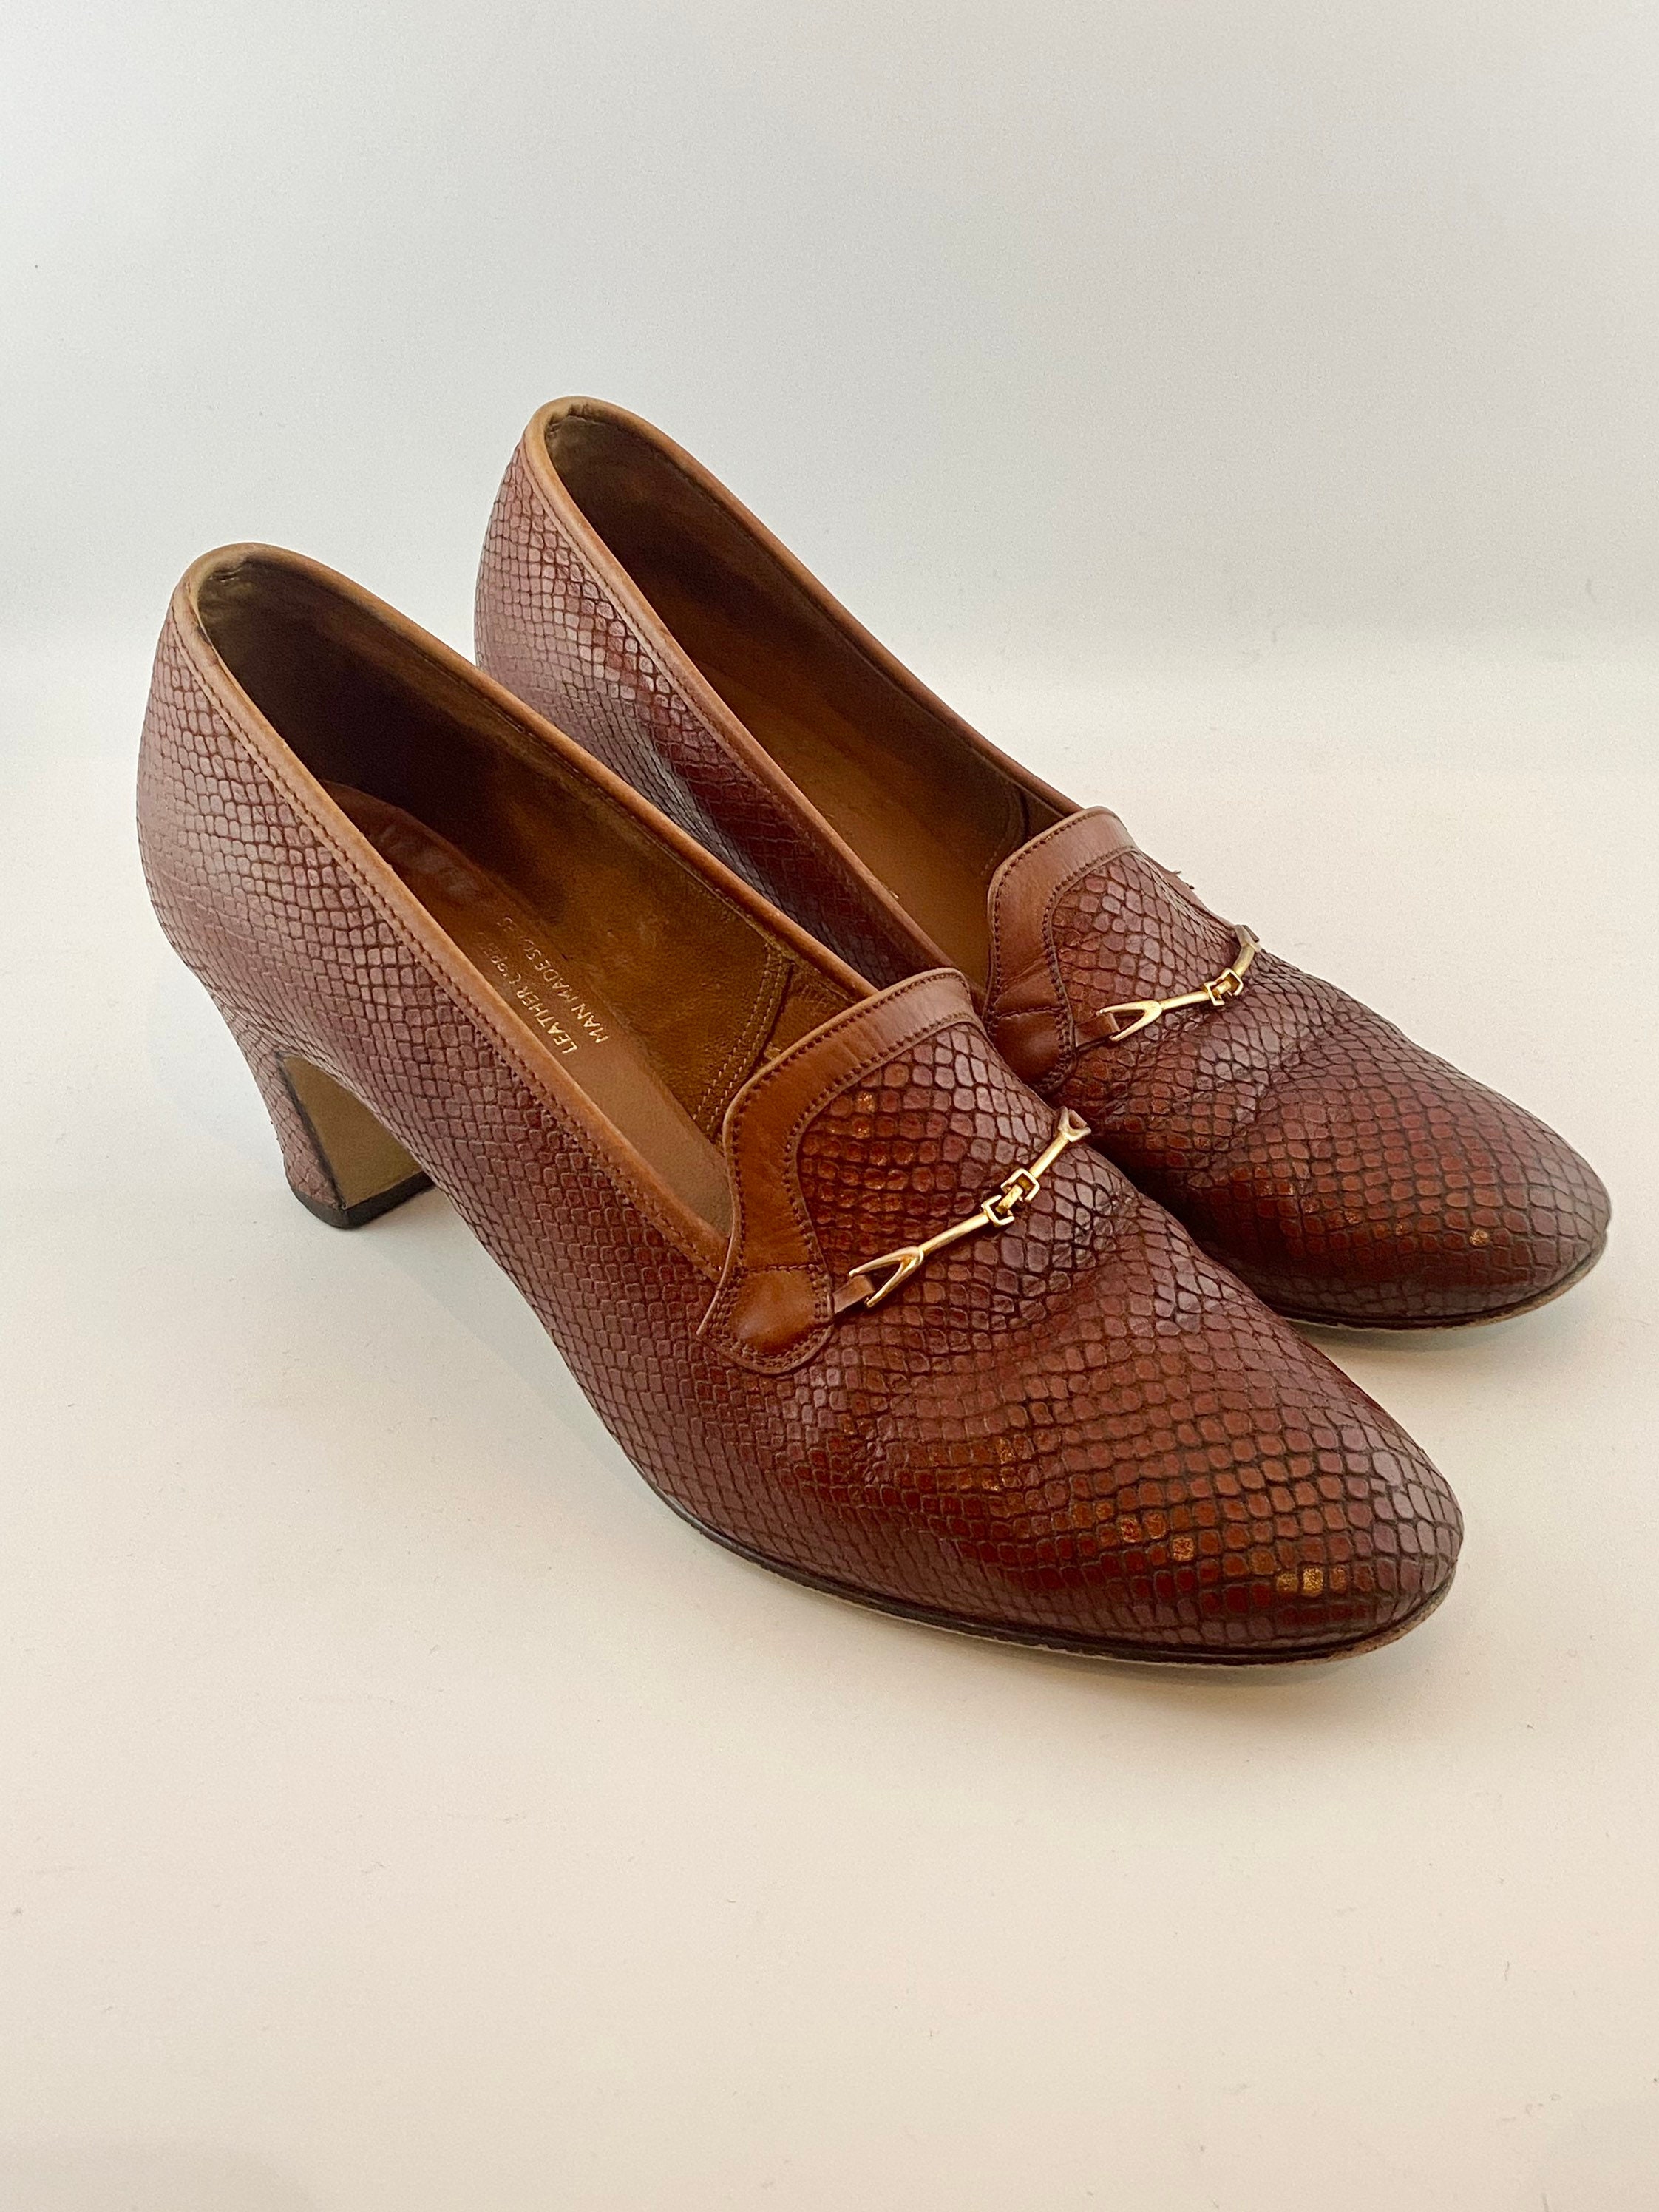 1950s 60s Church churches ladies made in england english faux snakeskin exotic brown heeled slip on horsebit shoes UK 6